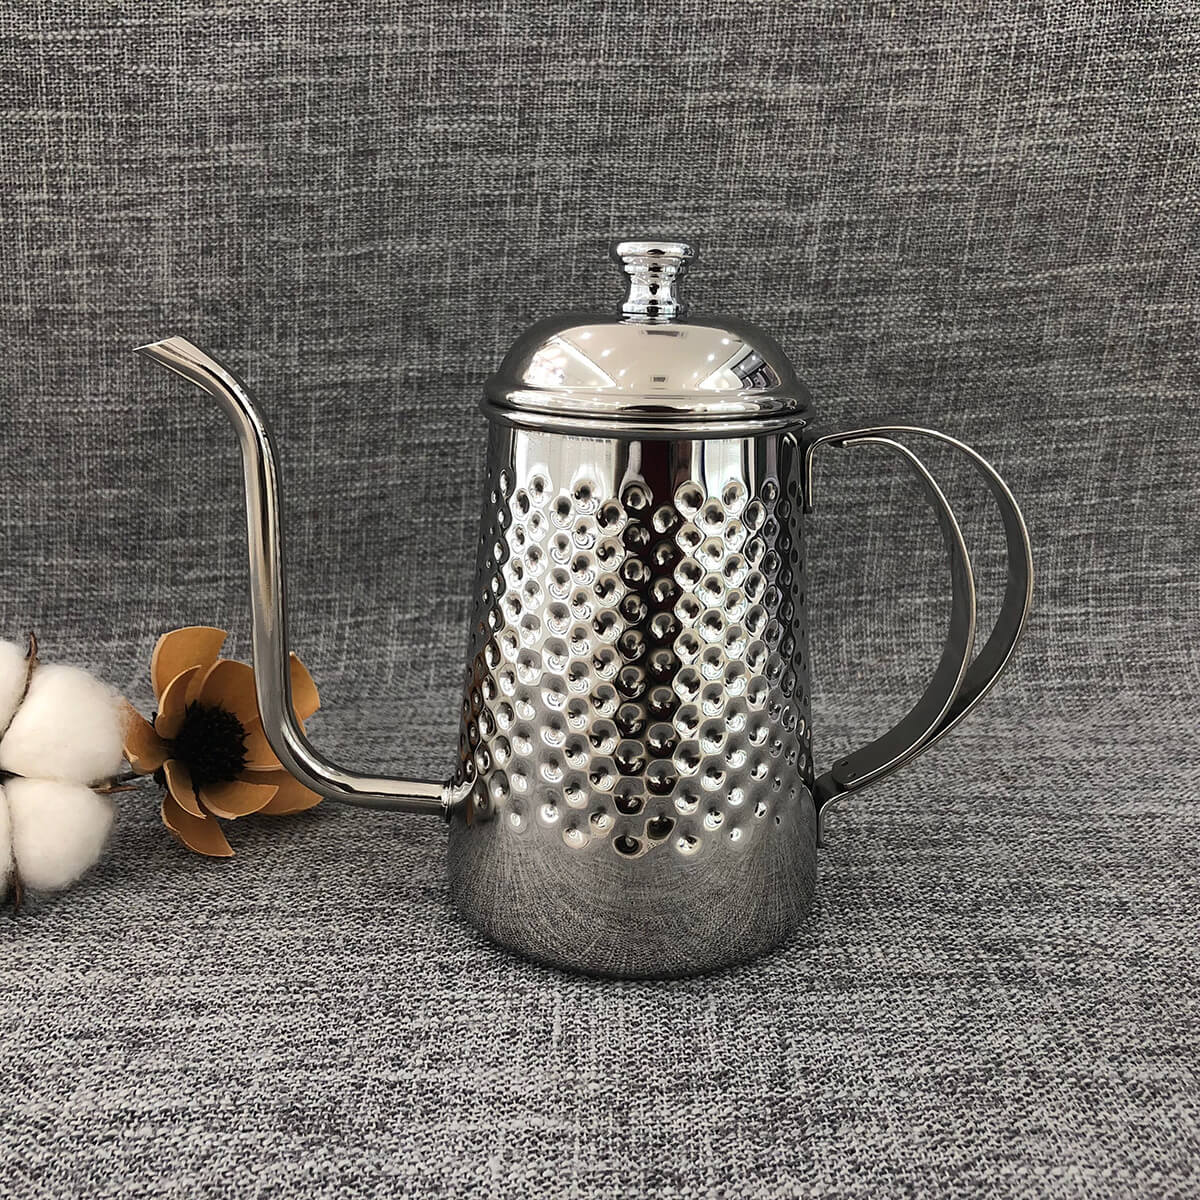 New Design 304 Stainless Steel Gooseneck Pour Over Drip Coffee Kettle